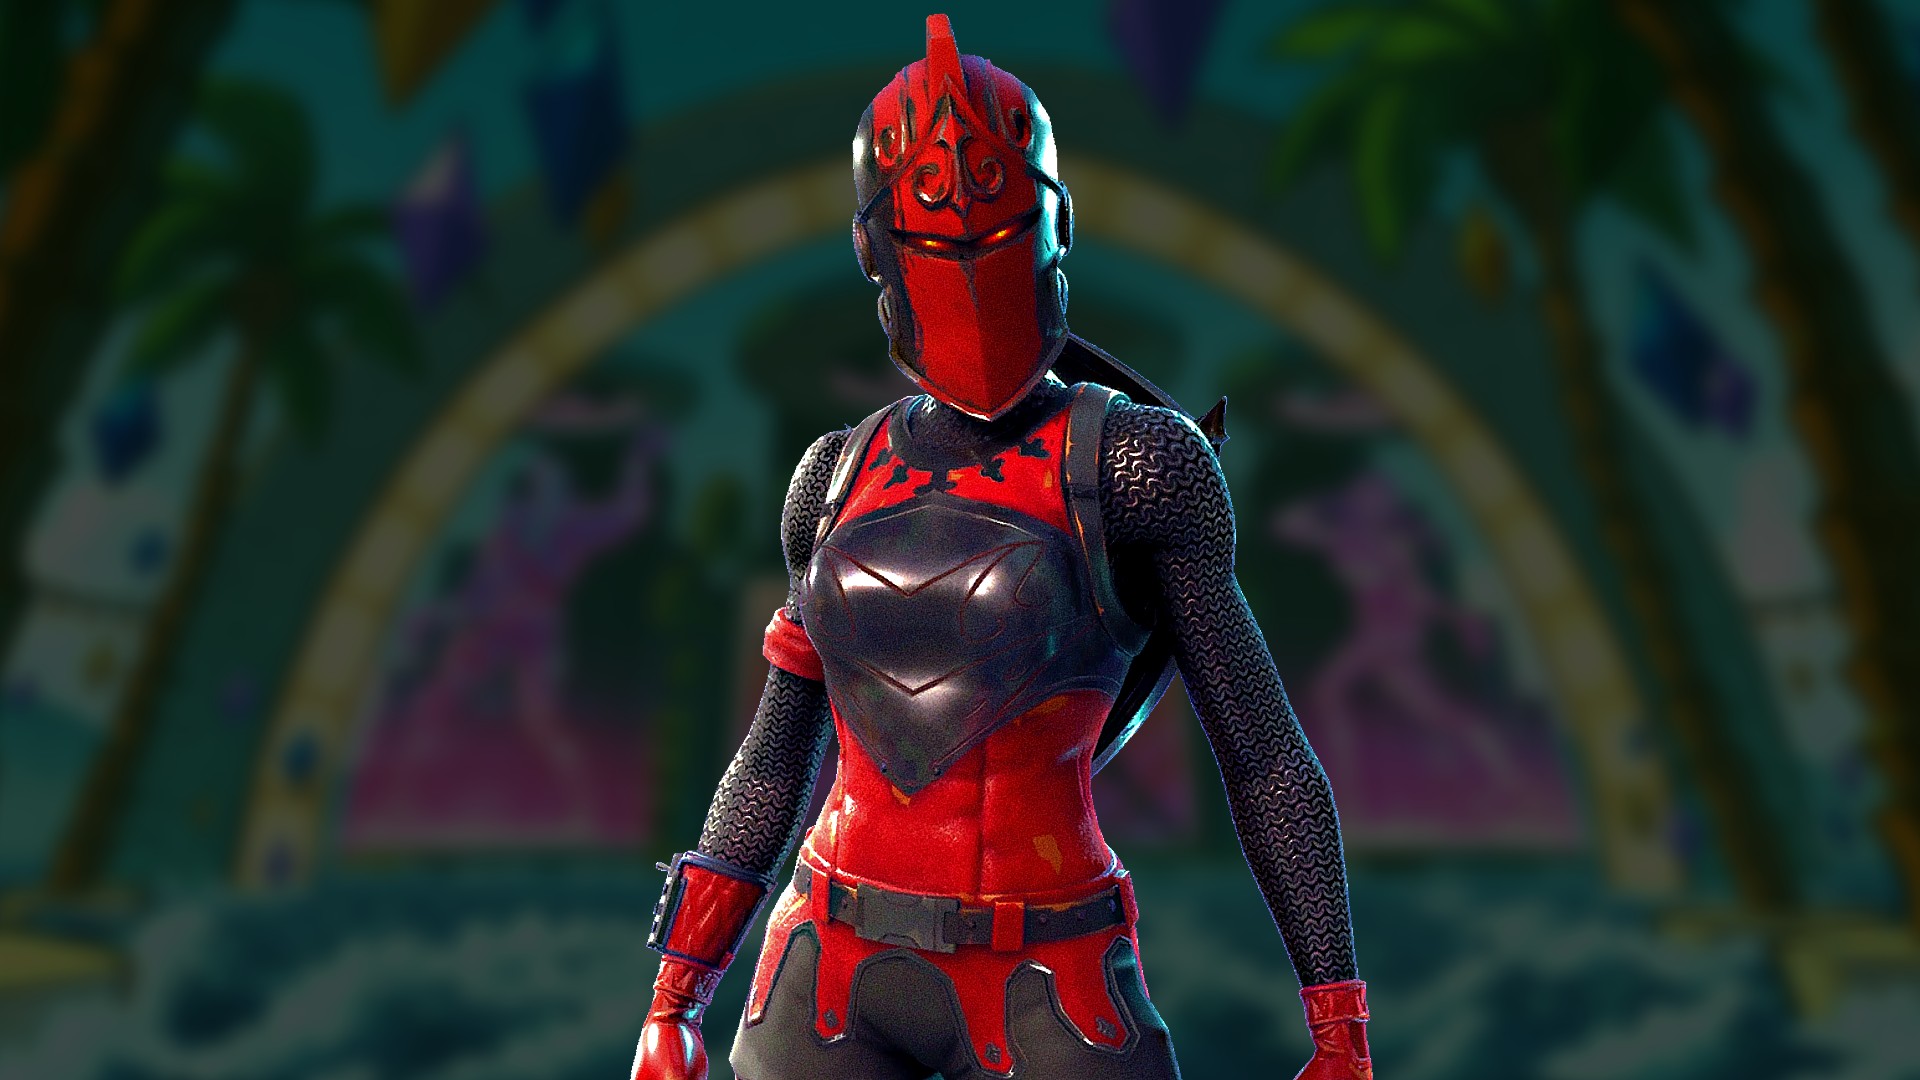 Glat skadedyr udrydde Halloween hits Fortnite with Red Knight and Fortnightmare skins return |  The Loadout